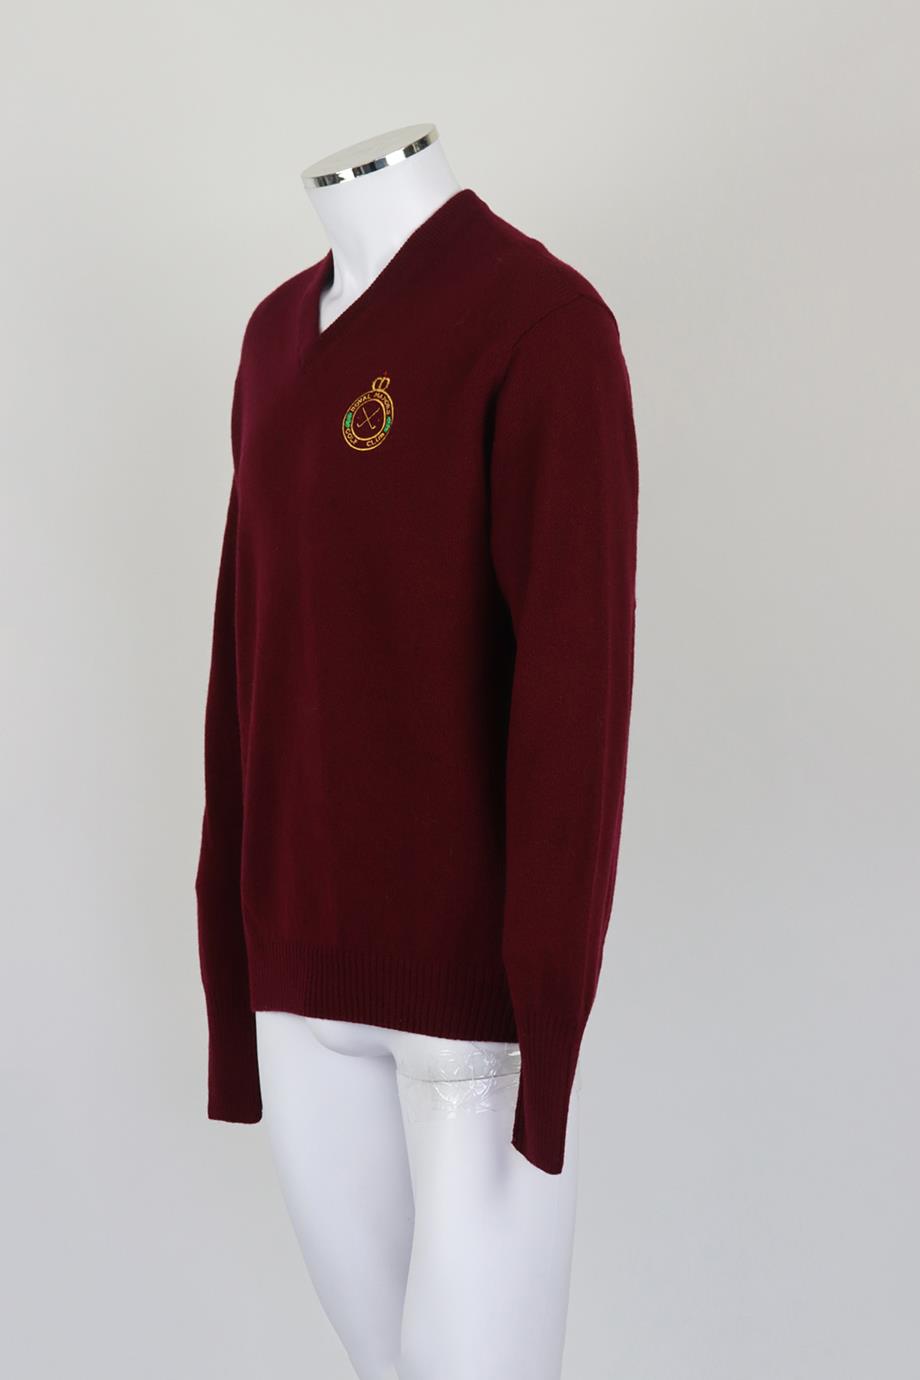 MANORS MEN'S EMBROIDERED WOOL SWEATER MEDIUM